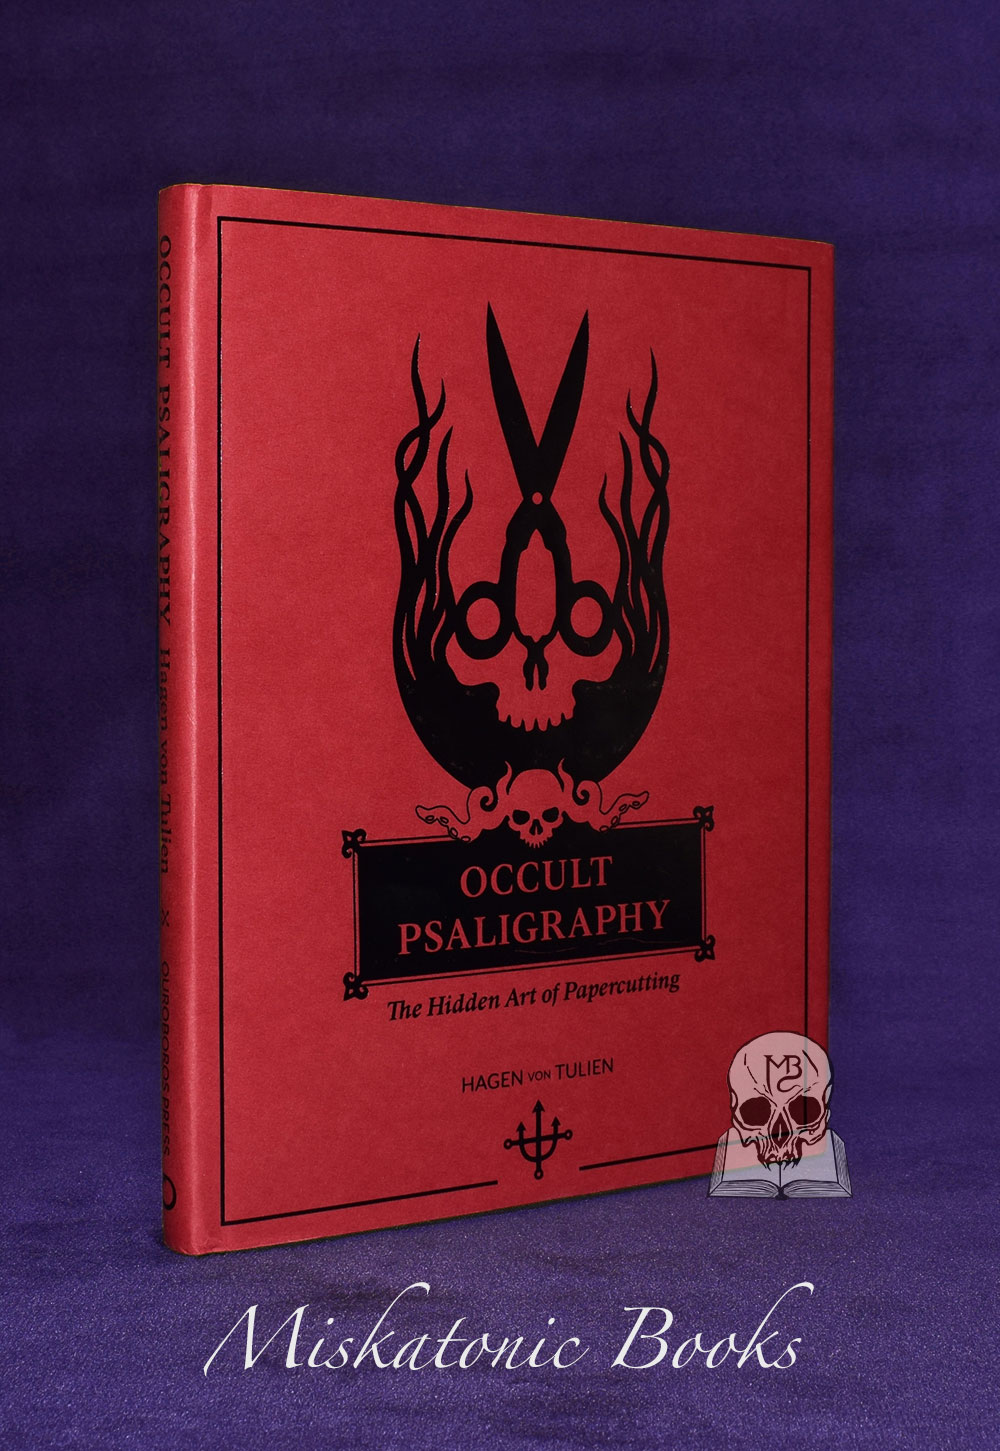 OCCULT PSALIGRAPHY by Hagen von Tulien (Limited Edition Hardcover)